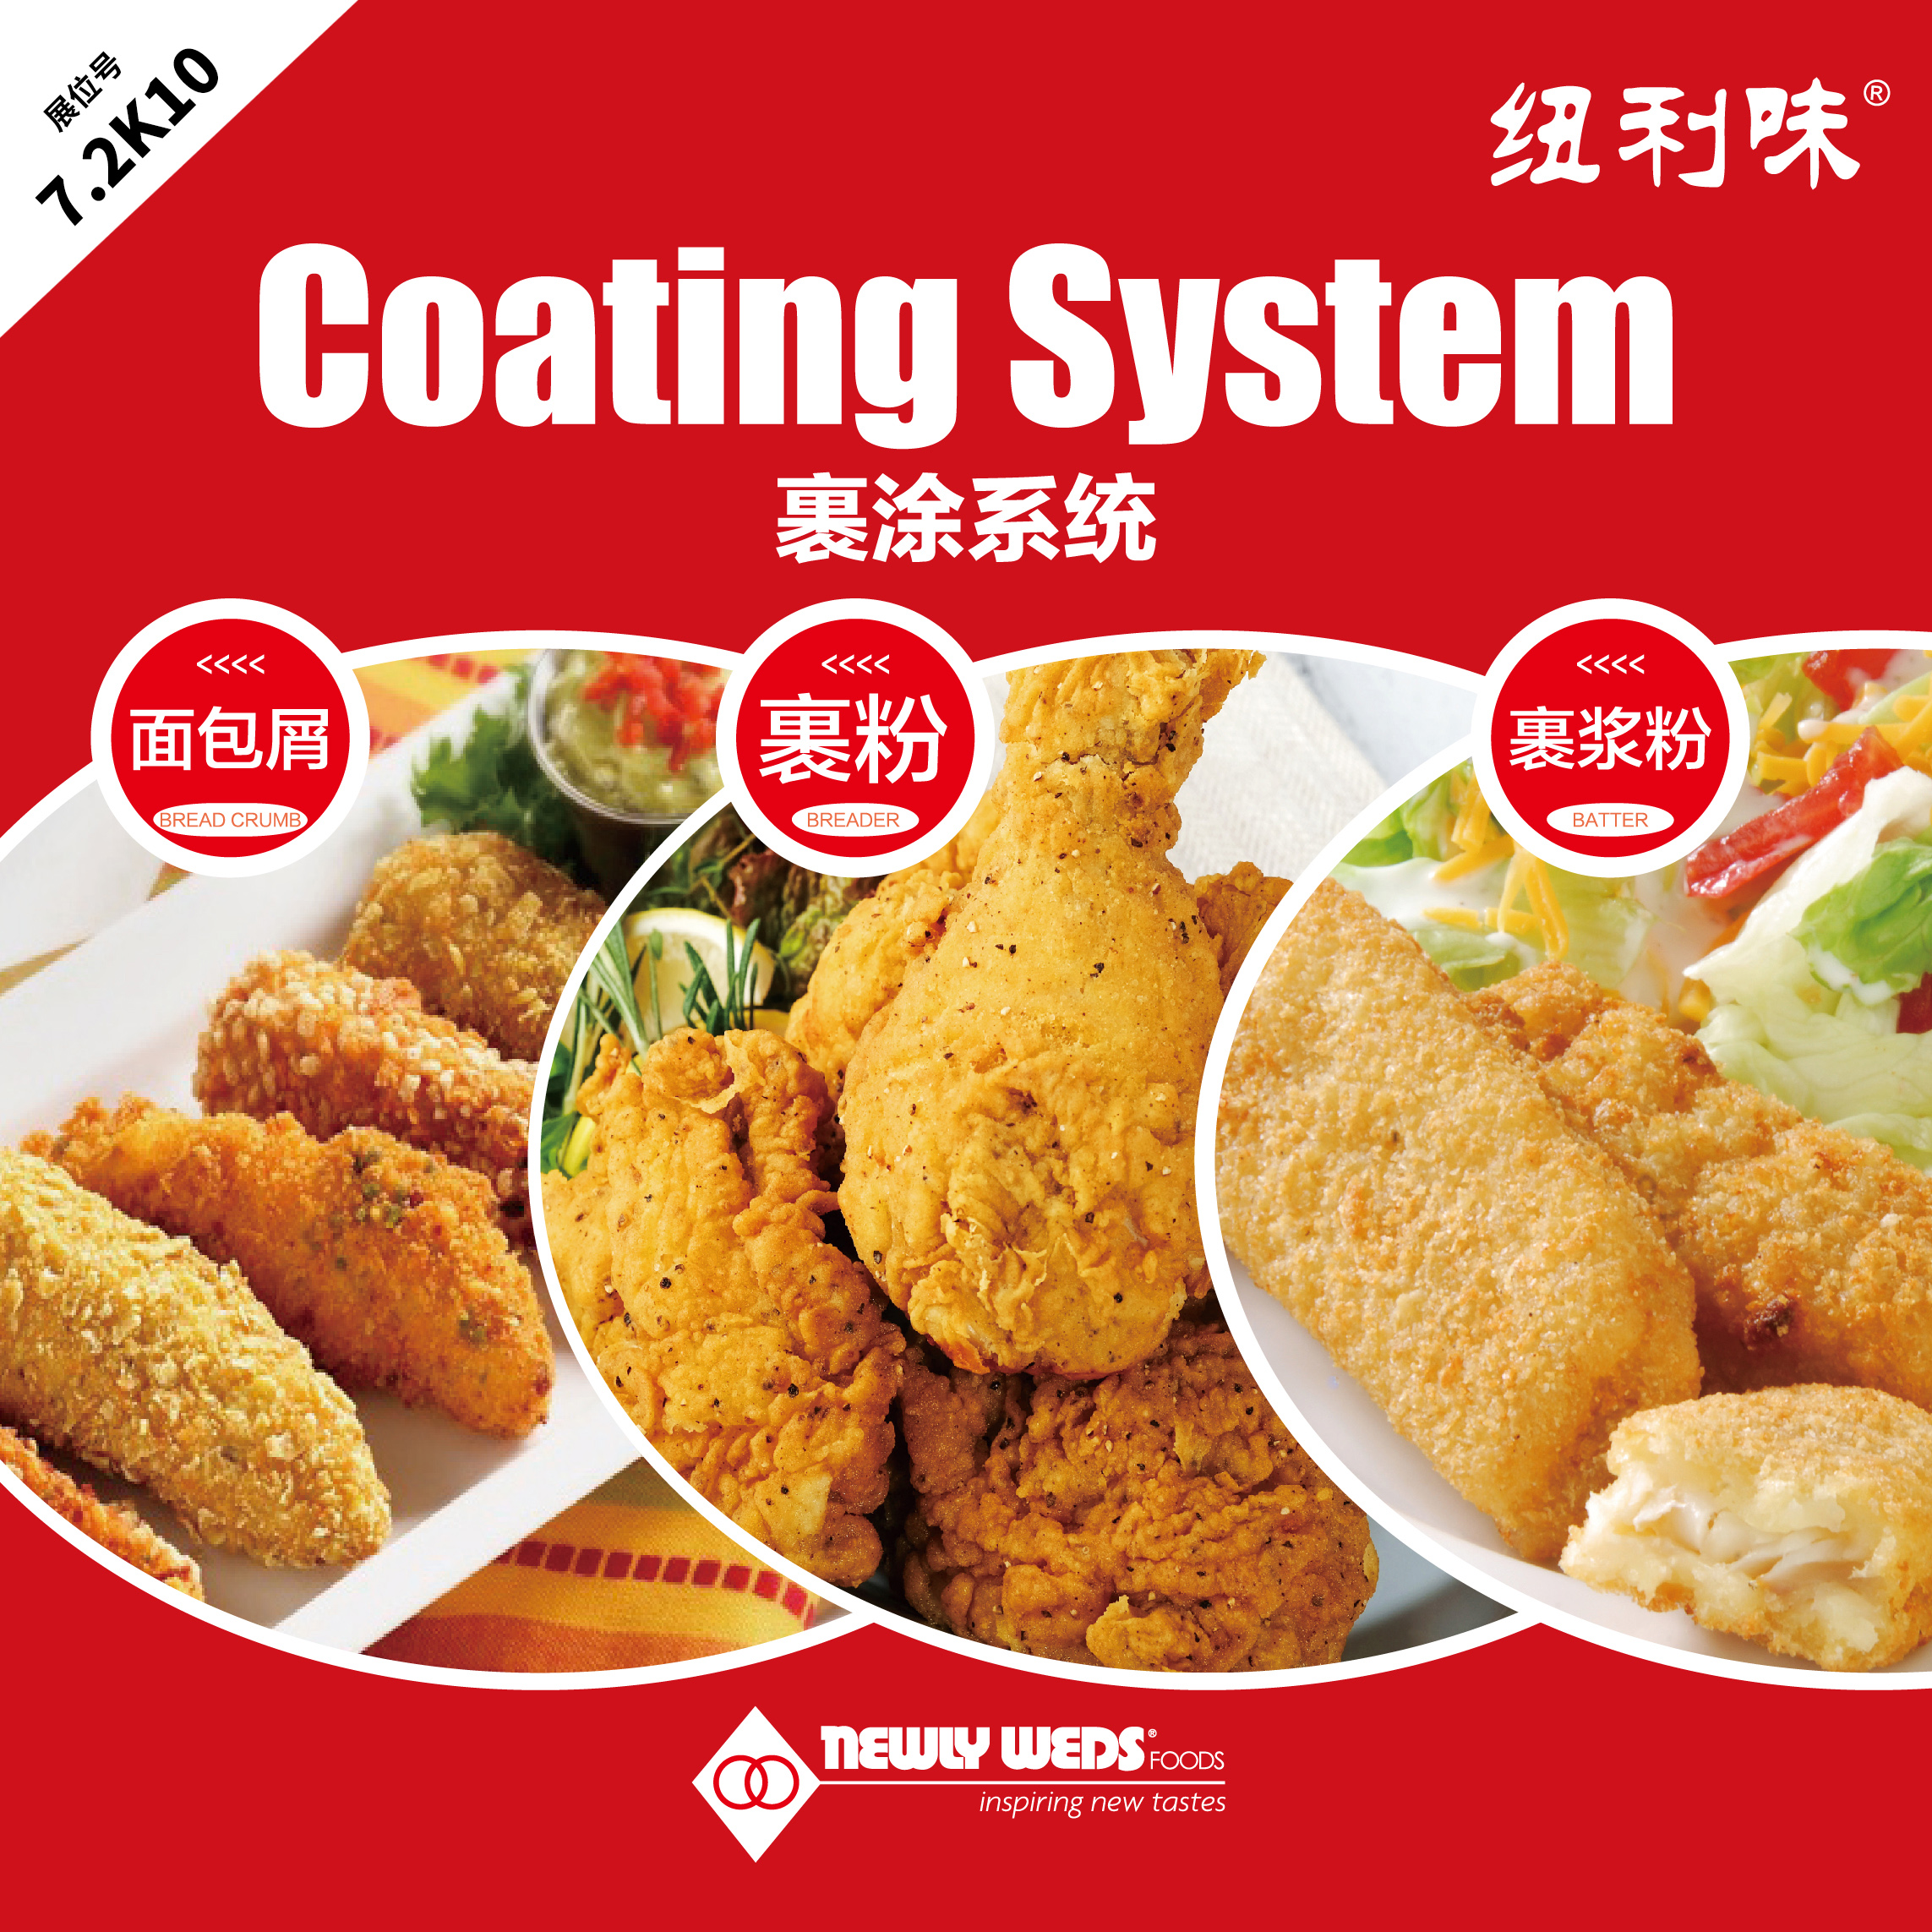 1）	Newley-flavored food coating system